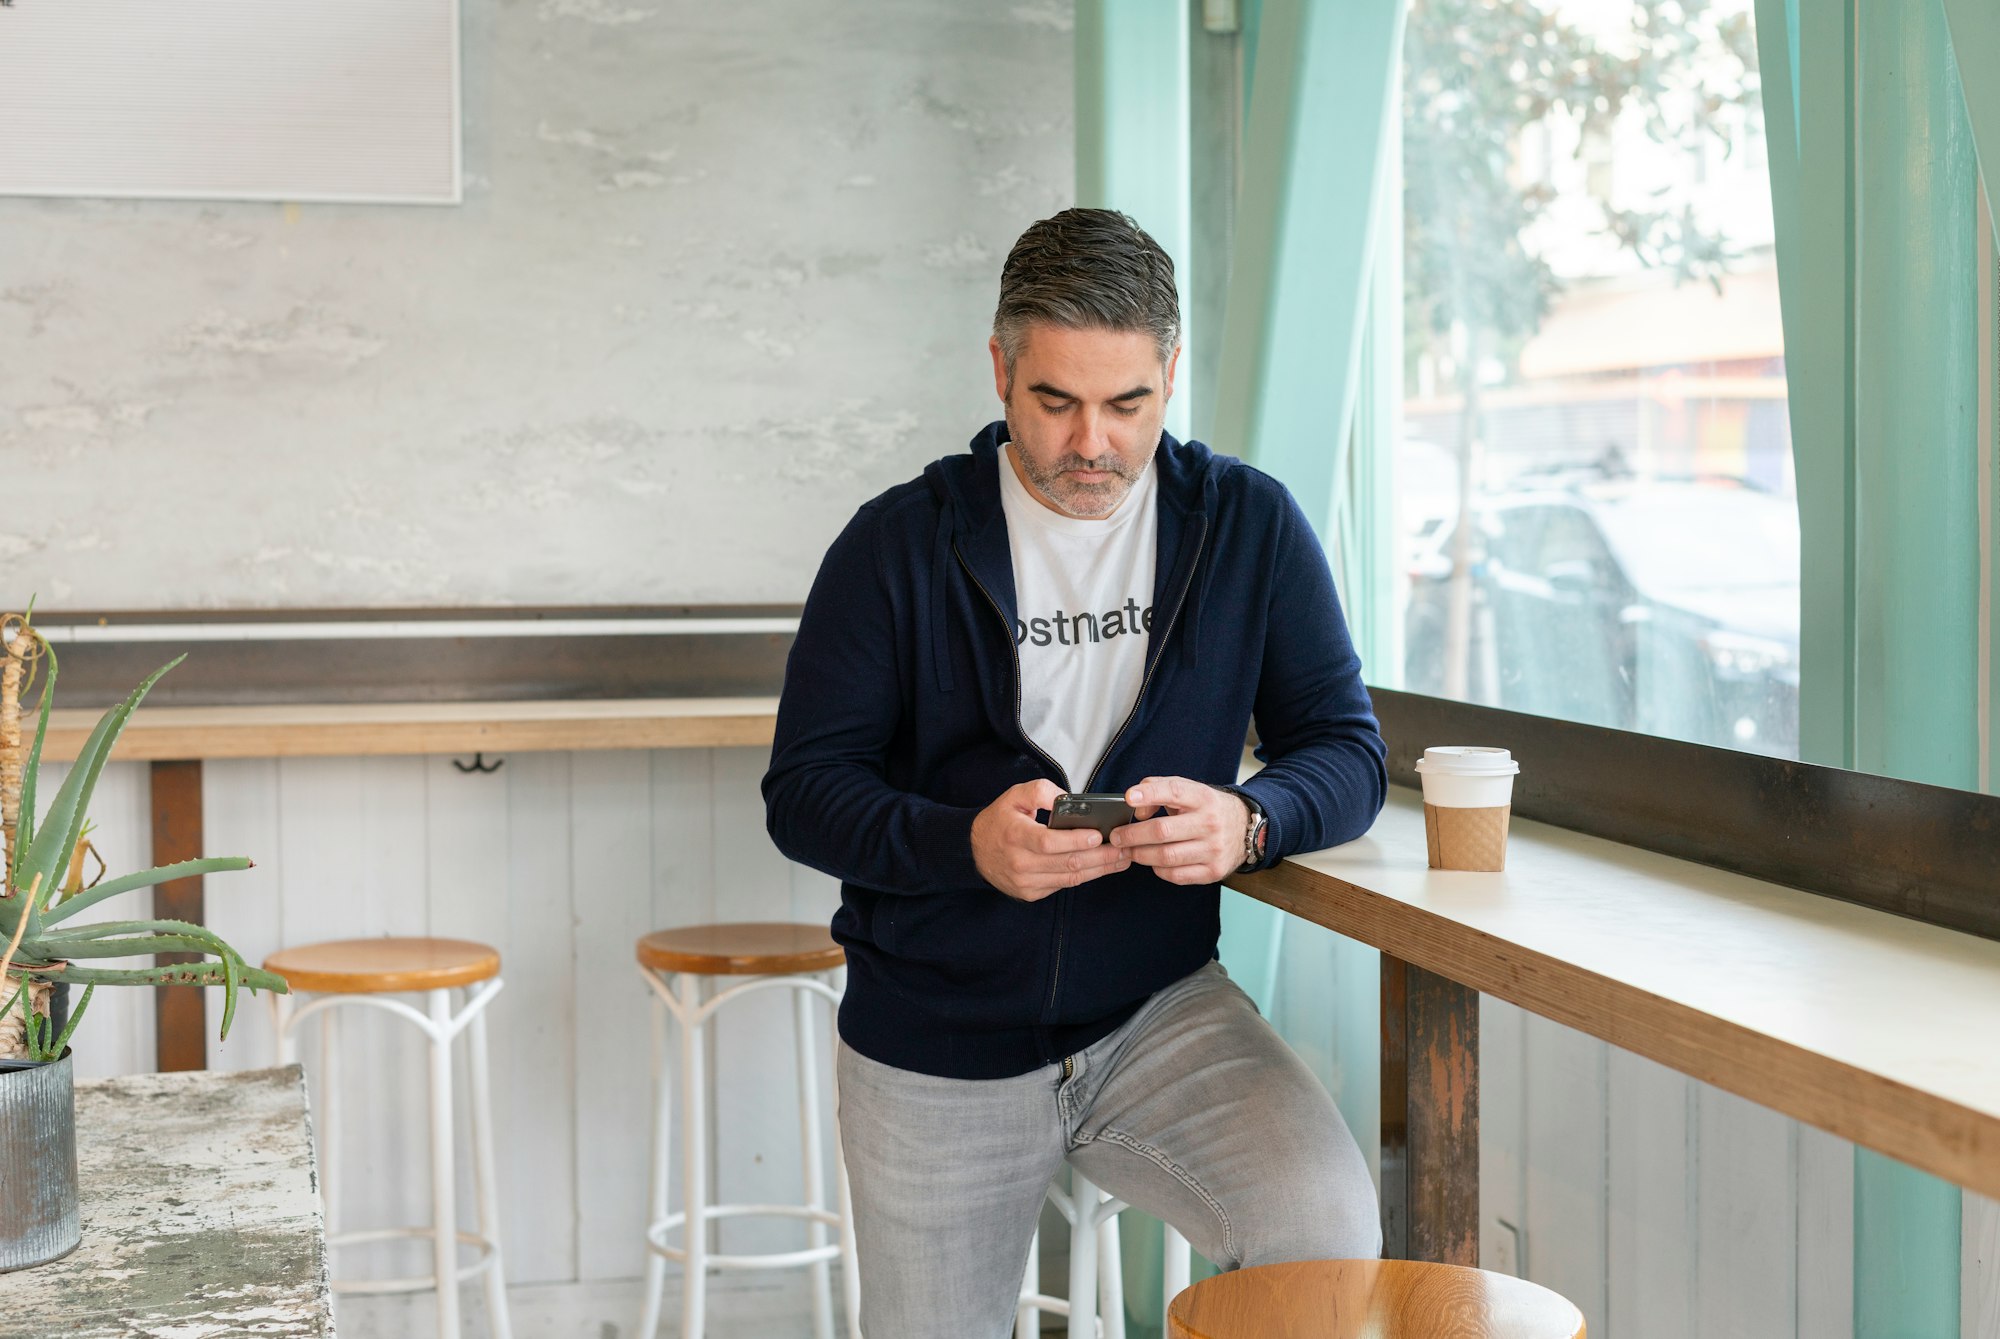 A salesperson checking work phone in a coffee shop